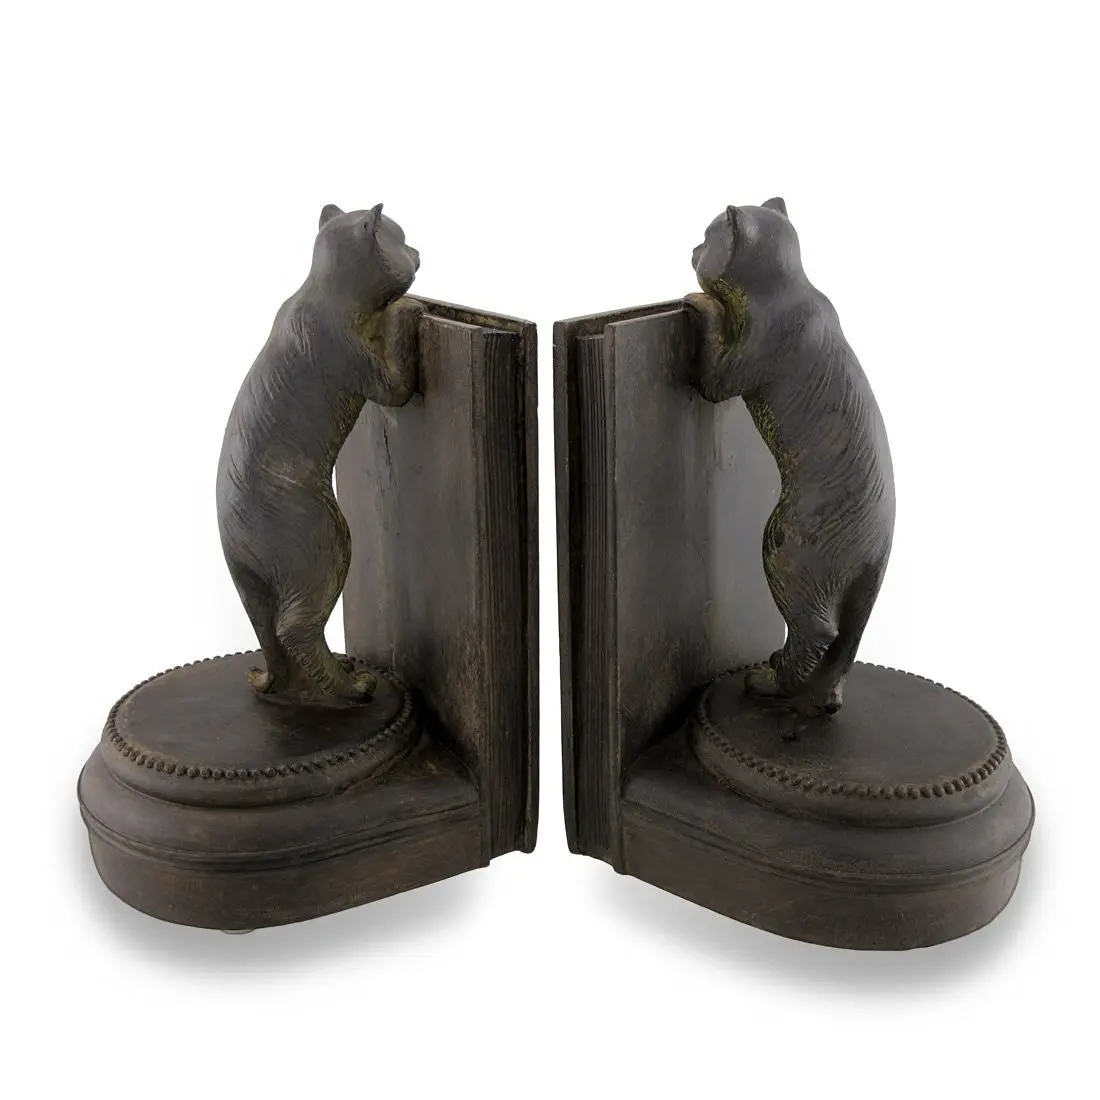 black iron bookends